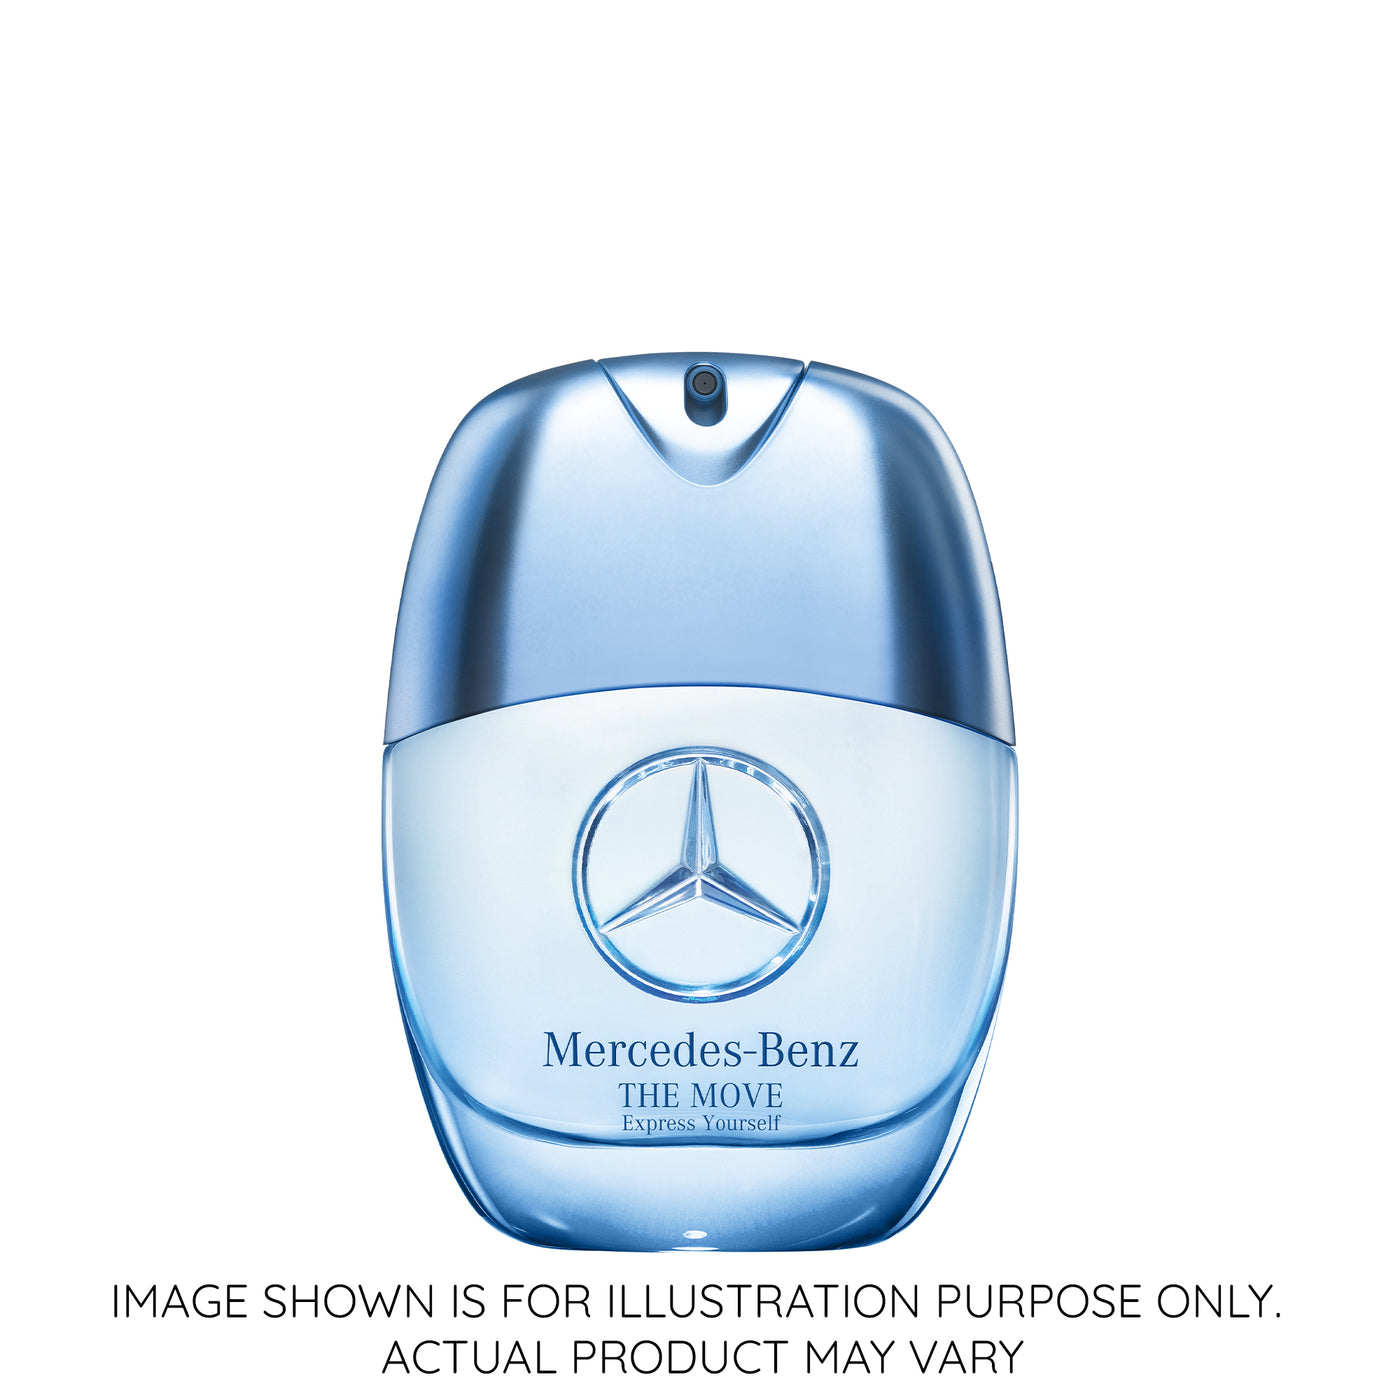 Mercedes-Benz The Move Exp Your EDT 100ml Tester